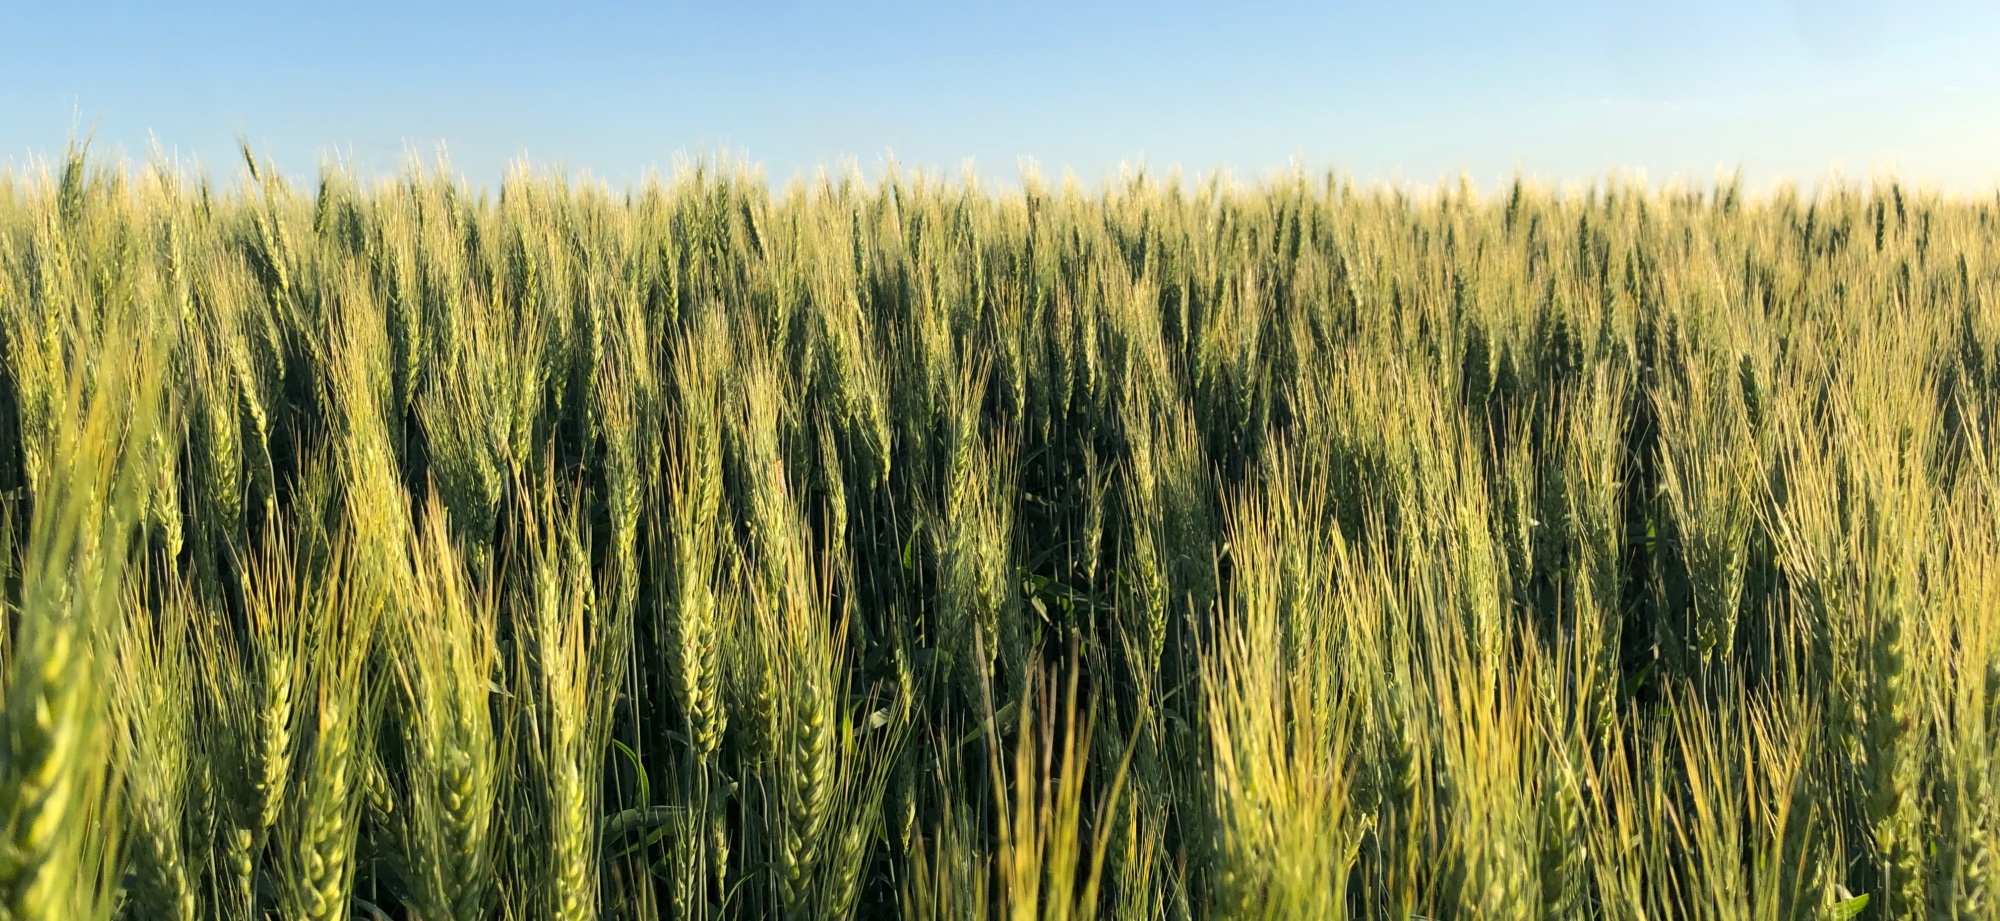 A photo of a wheat field